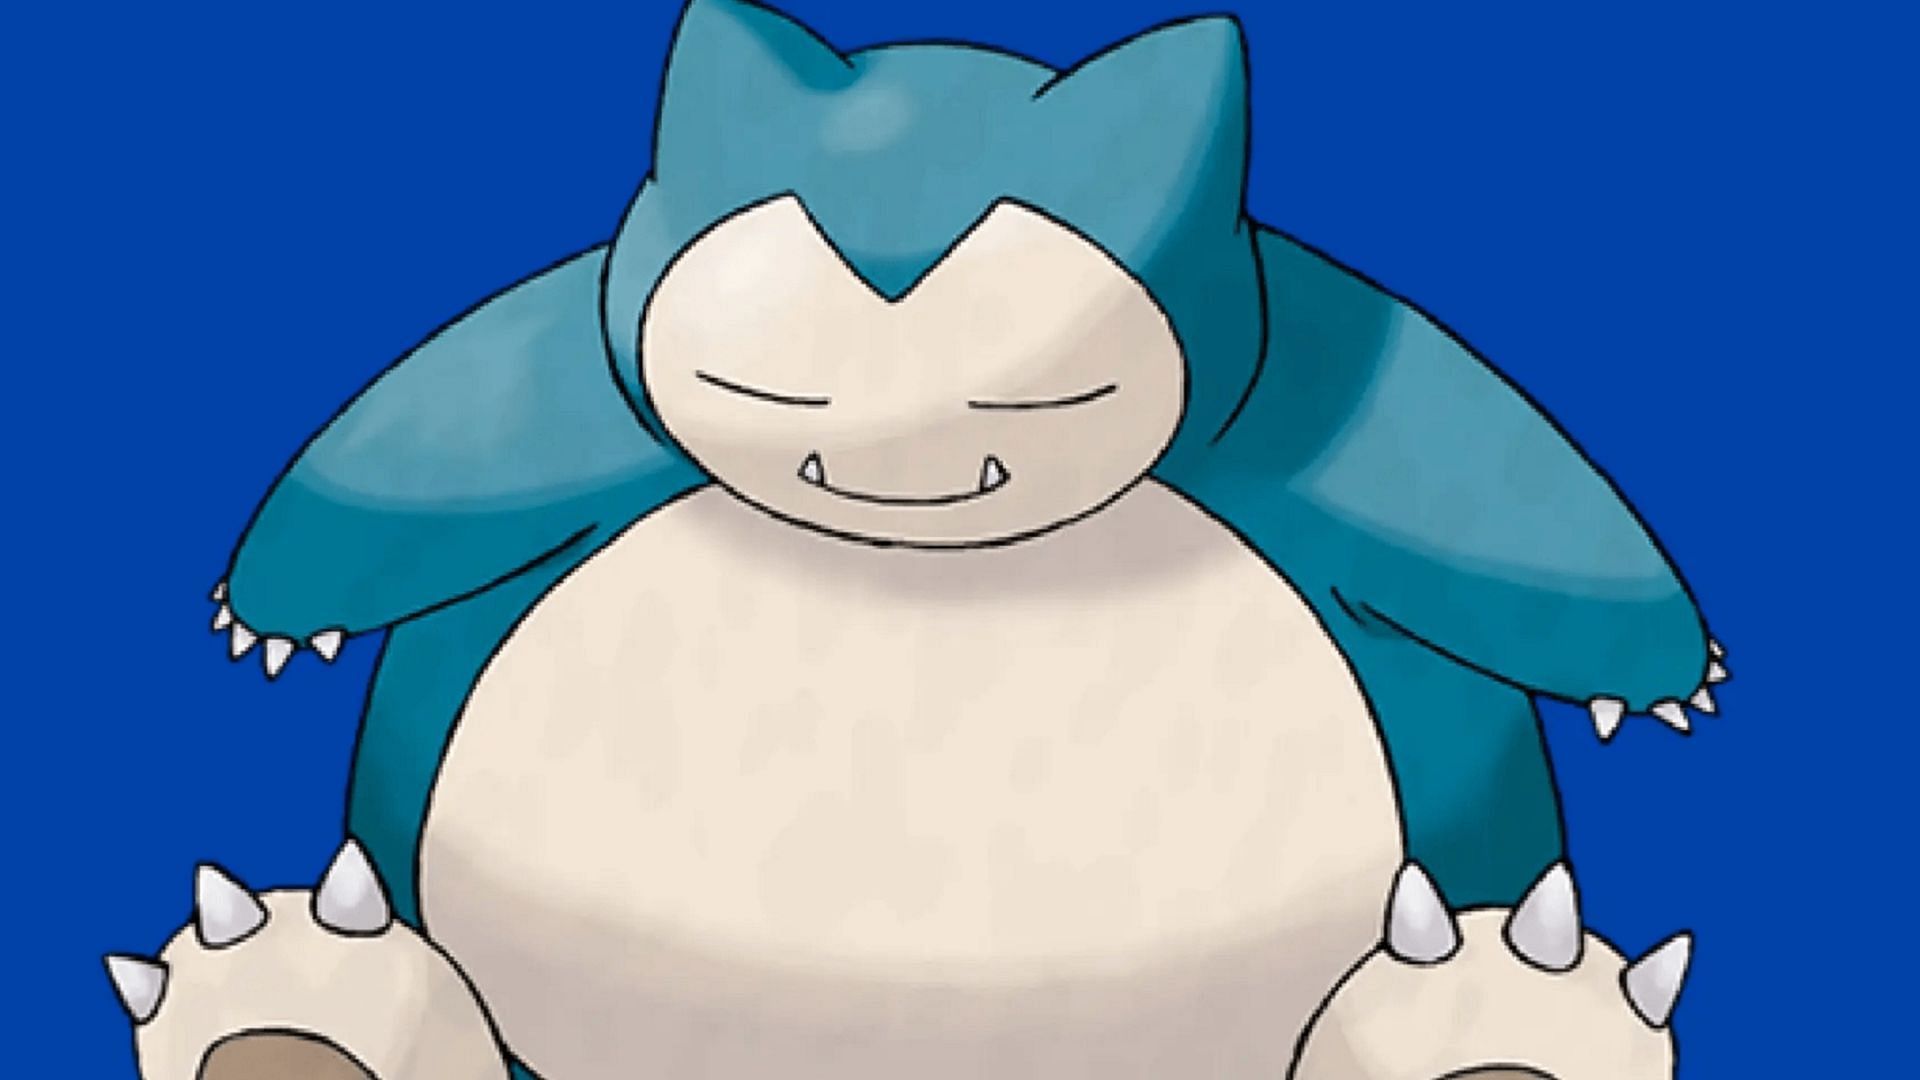 Snorlax can take plenty of punishment and keep fighting in Pokemon GO (Image via Niantic)